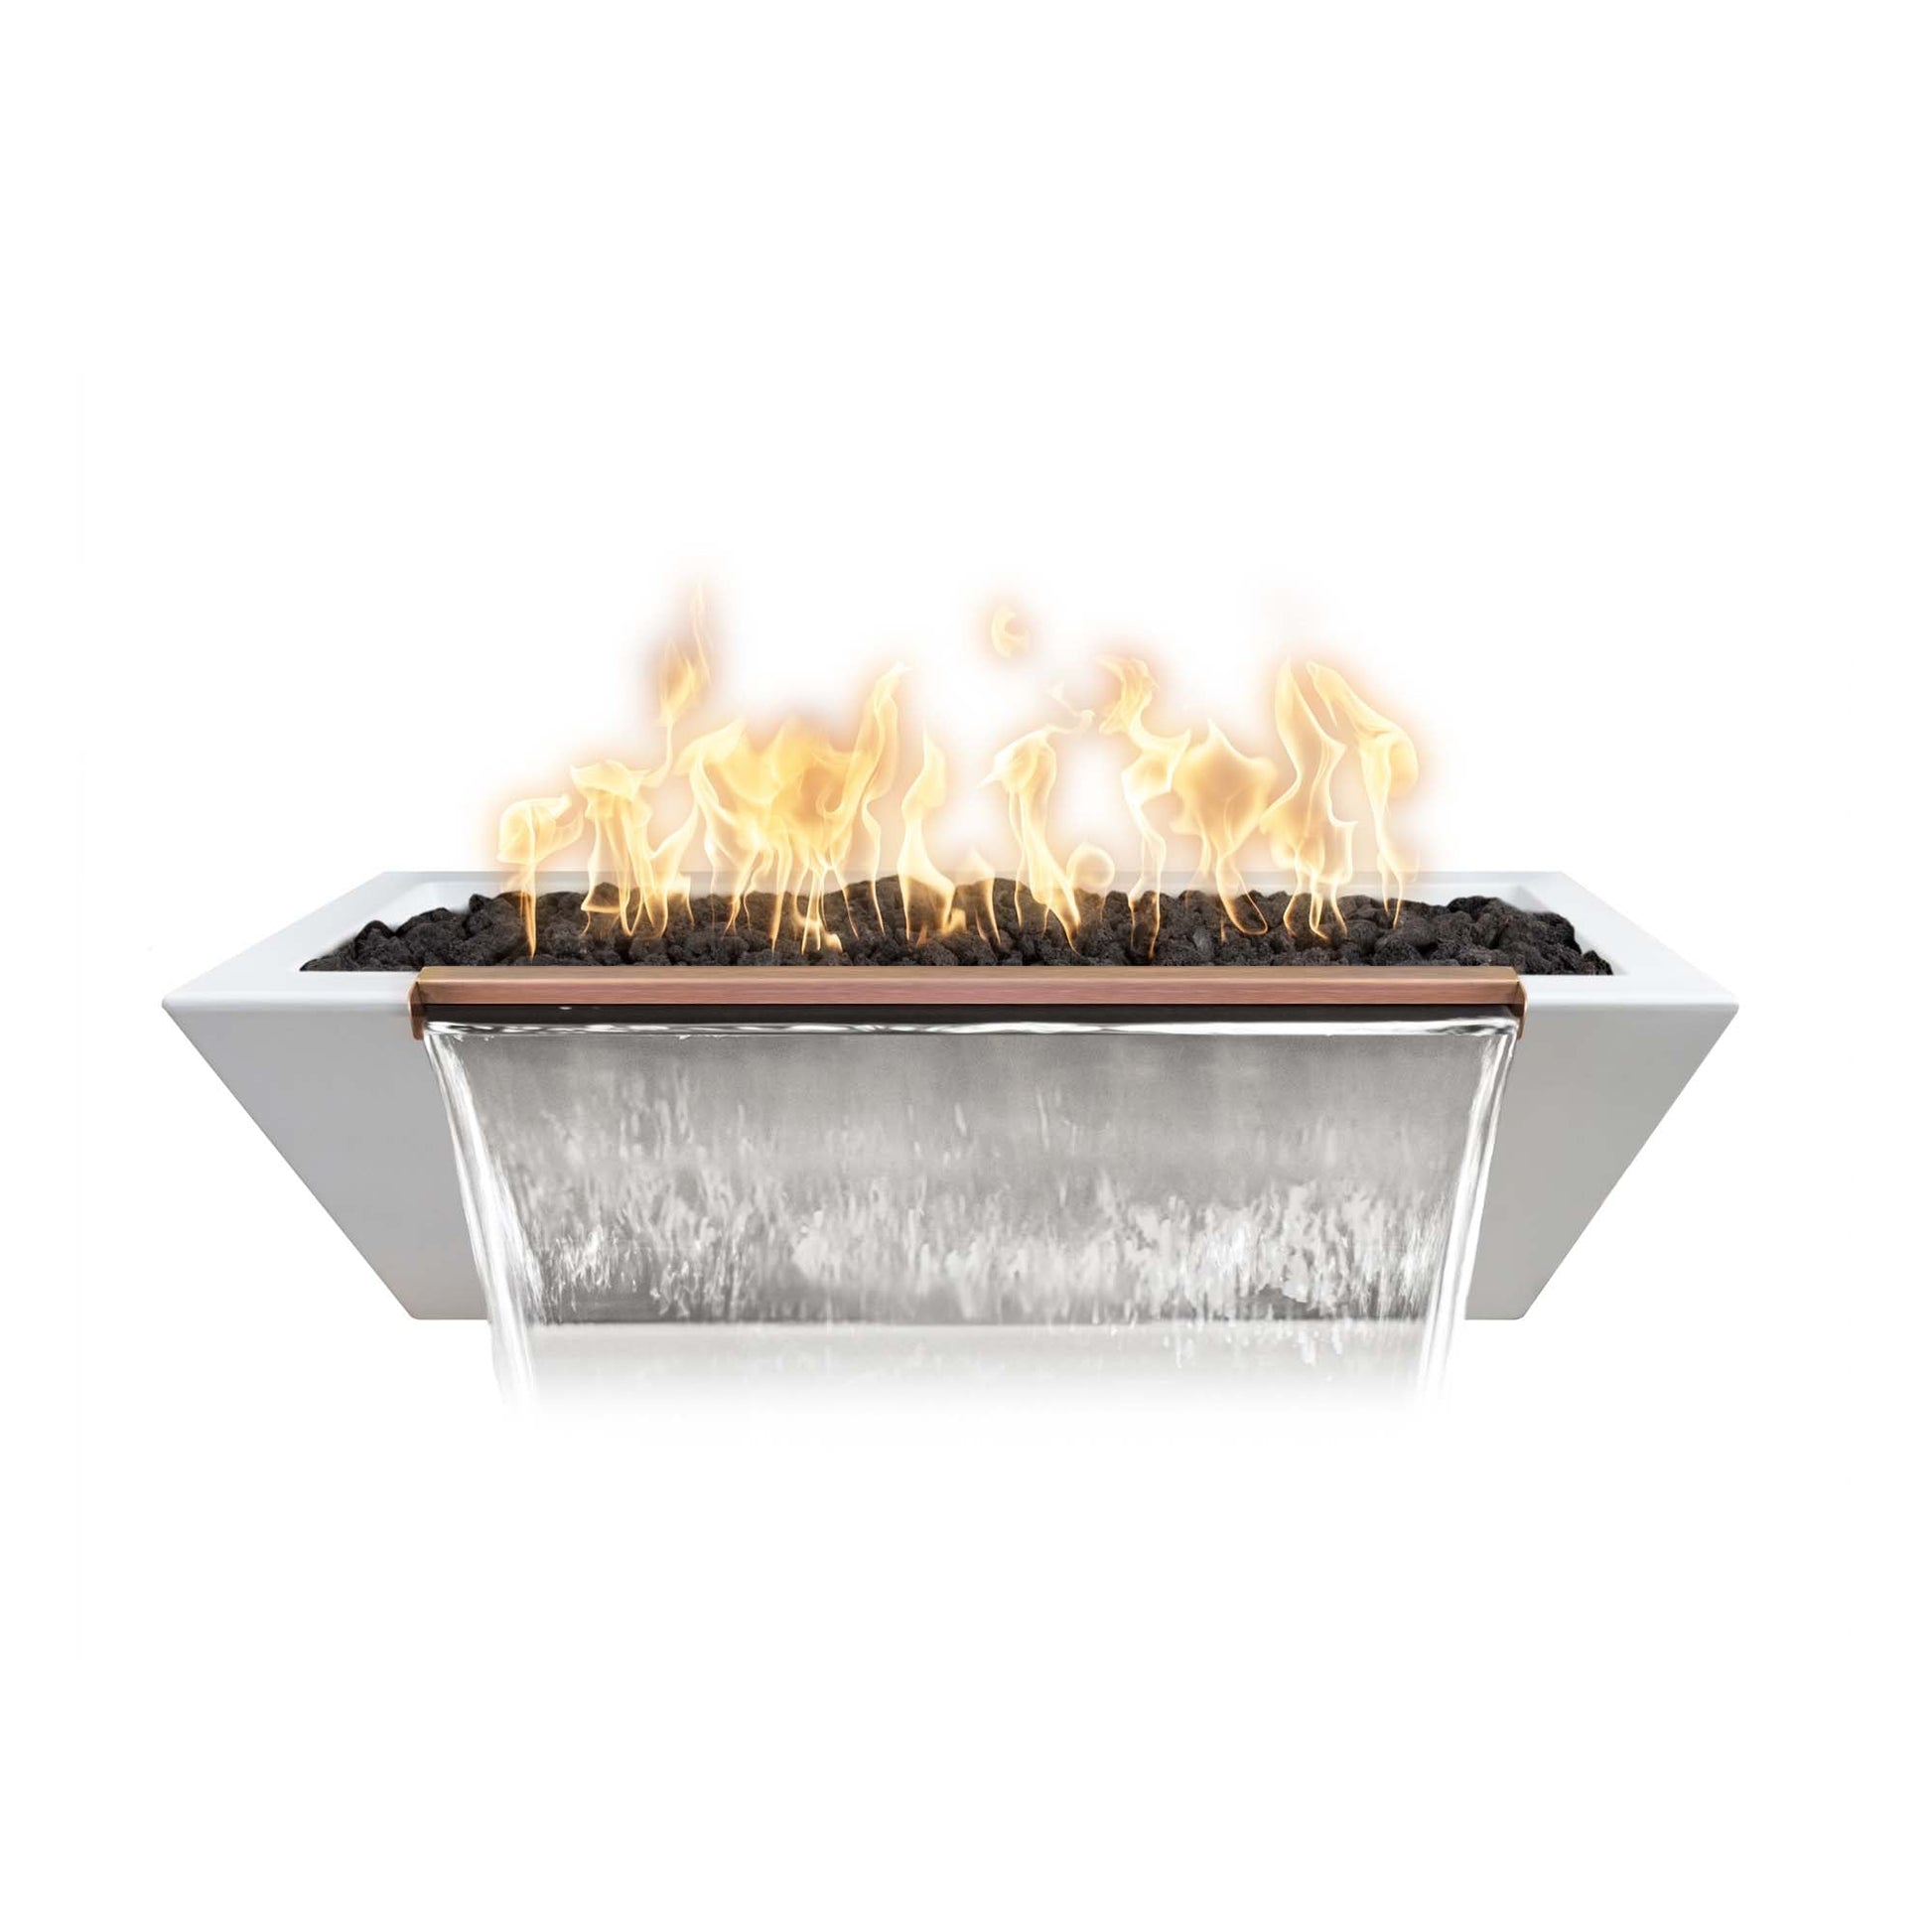 The Outdoor Plus Linear Maya 72" Metallic Silver GFRC Concrete Natural Gas Fire & Water Bowl with Match Lit with Flame Sense Ignition